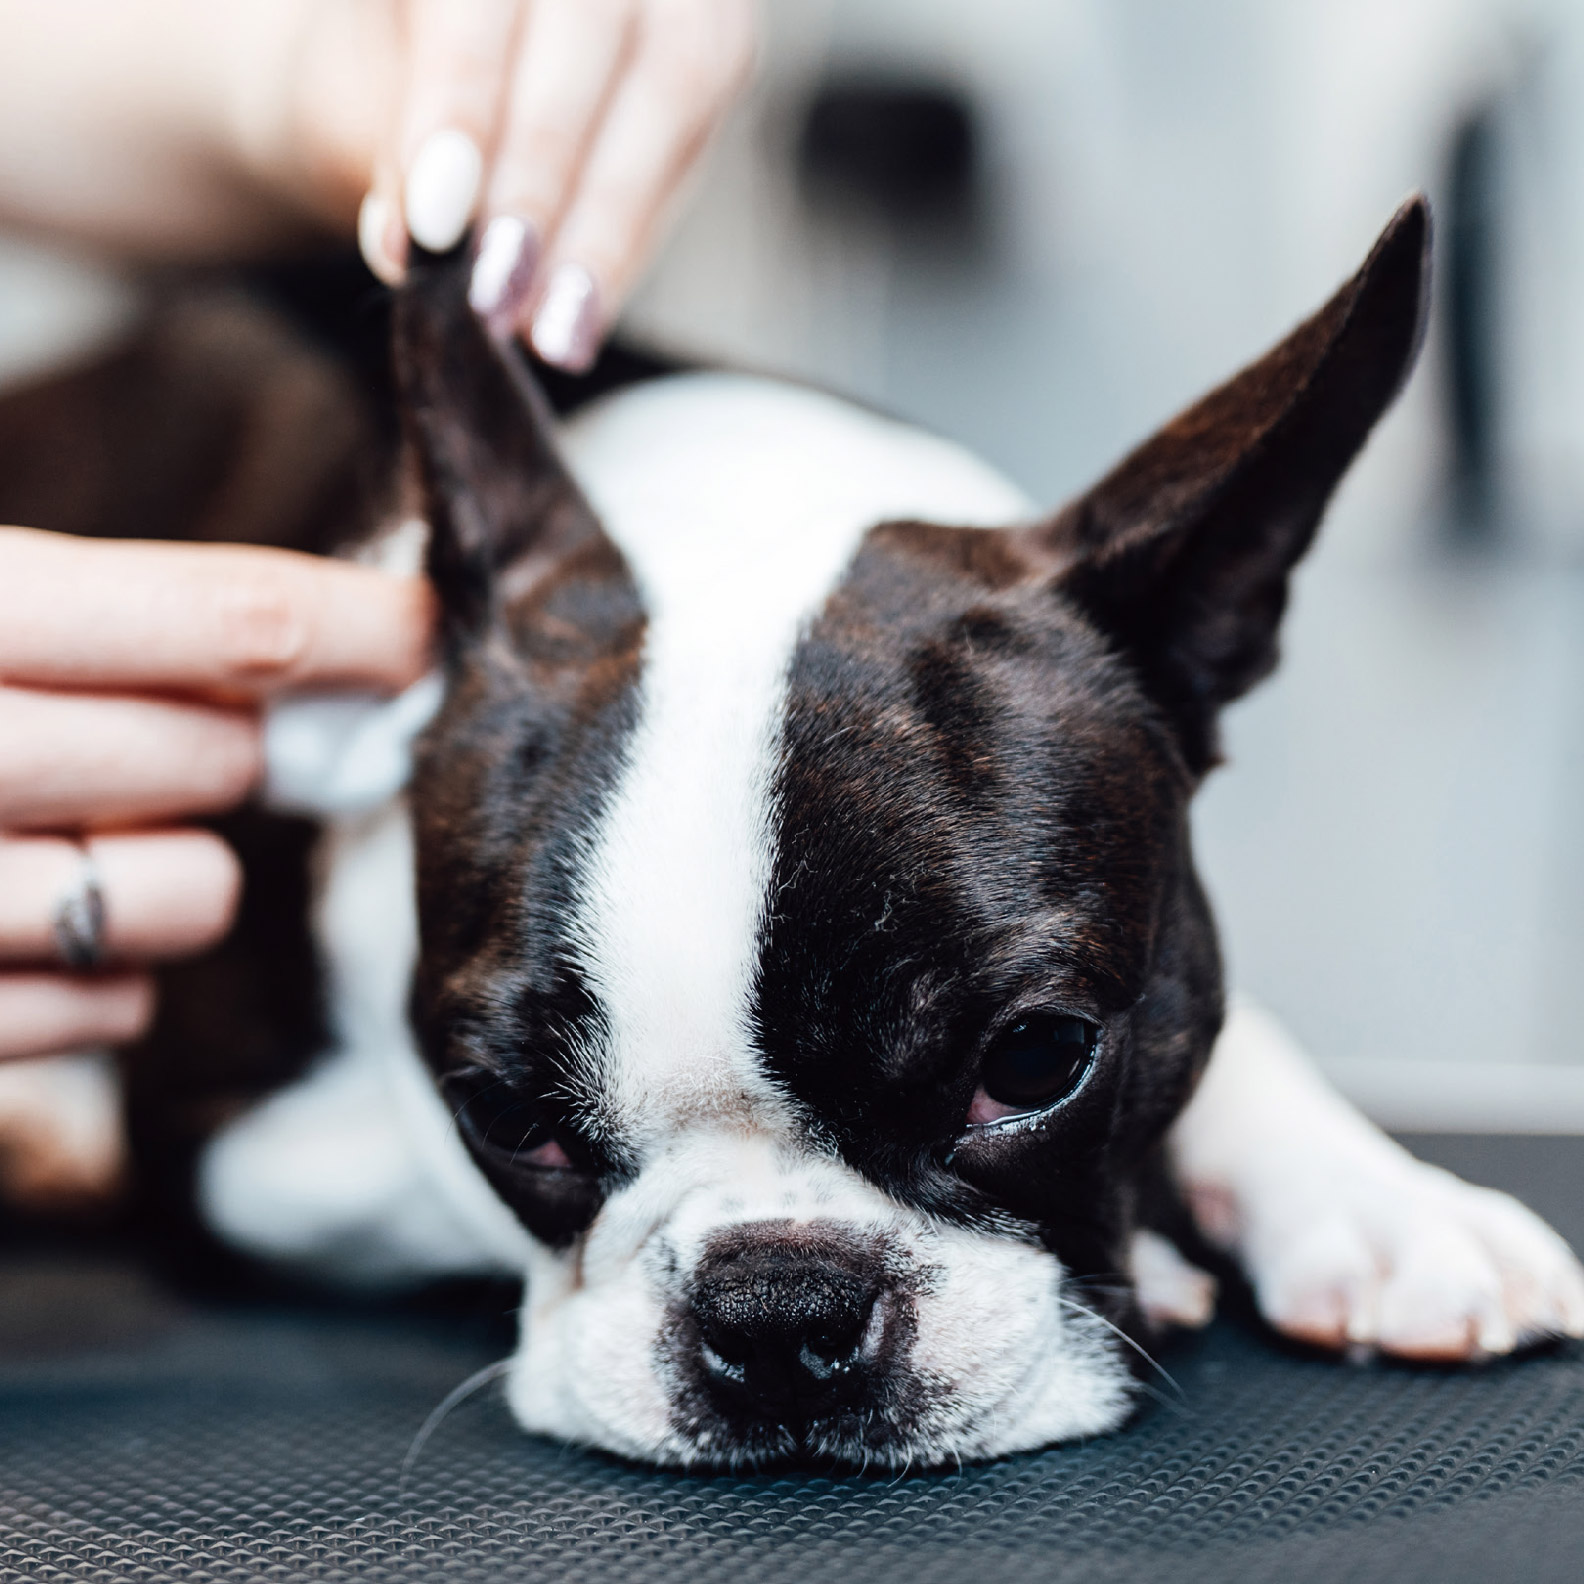 Ear Mites in Dogs: How to Tell If Your Dog Has Ear Mites | Reader's Digest